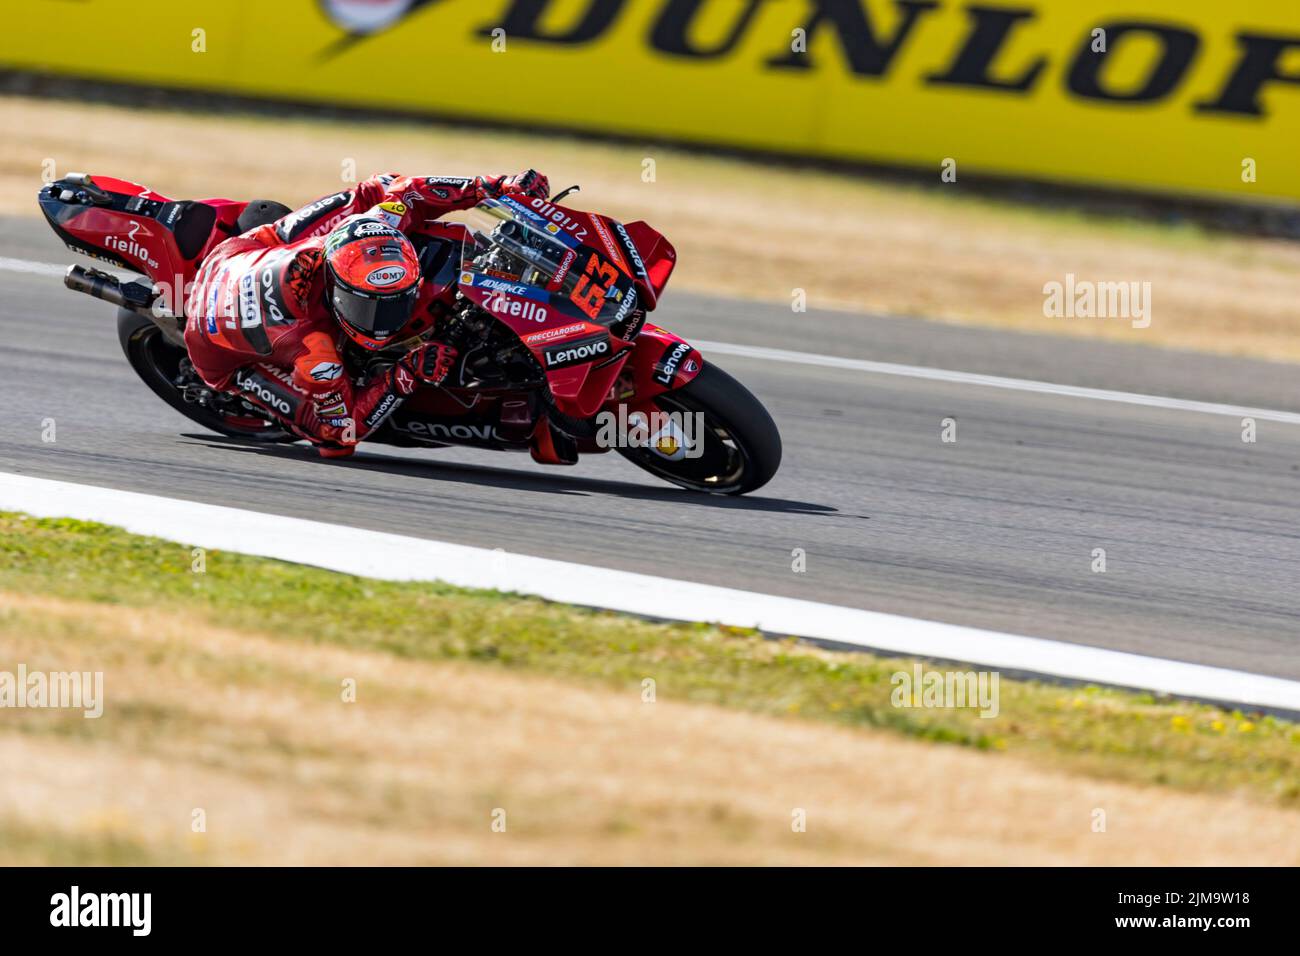 Silverstone, UK. 5th August 2022;  Silverstone Circuit, Silverstone, Northamptonshire, England: British MotoGP Grand Prix, Free Practice: Number 63 Ducati Lenovo Team bike ridden by Francesco Bagnaia during free practice at the British MotoGP Credit: Action Plus Sports Images/Alamy Live News Stock Photo